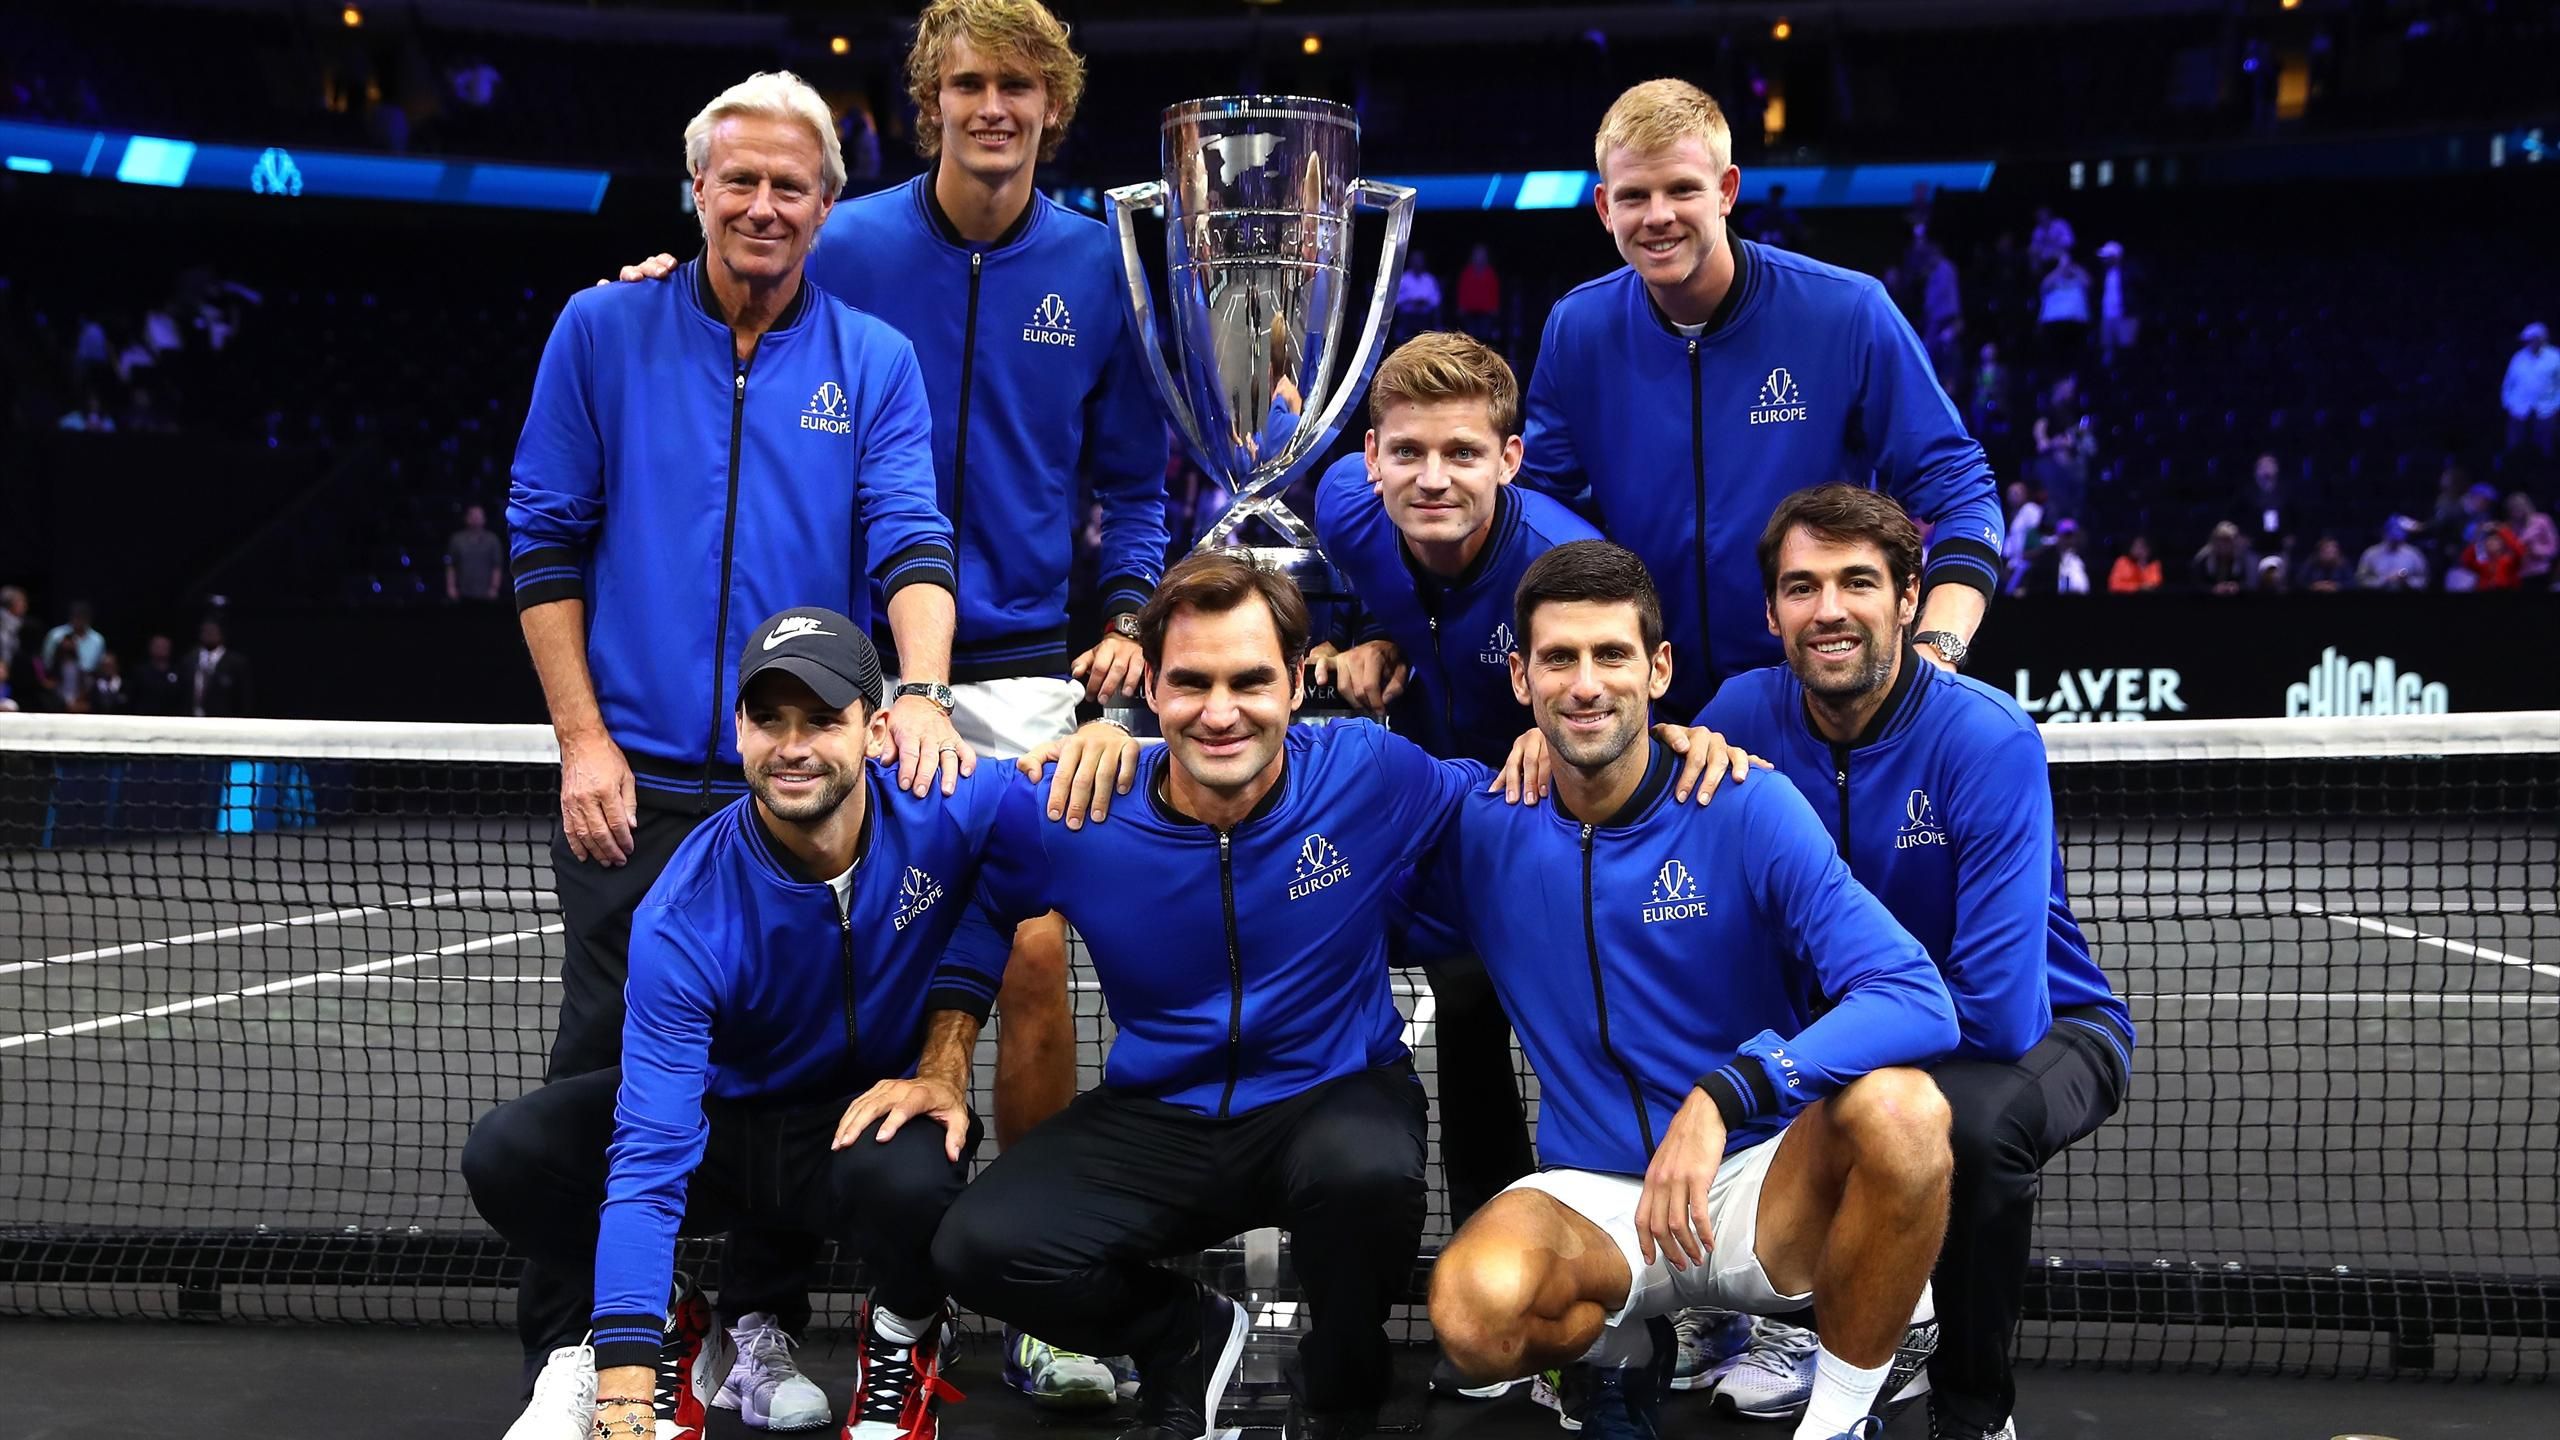 Laver Cup 2019 Schedule, teams, scoring system and everything you need to know